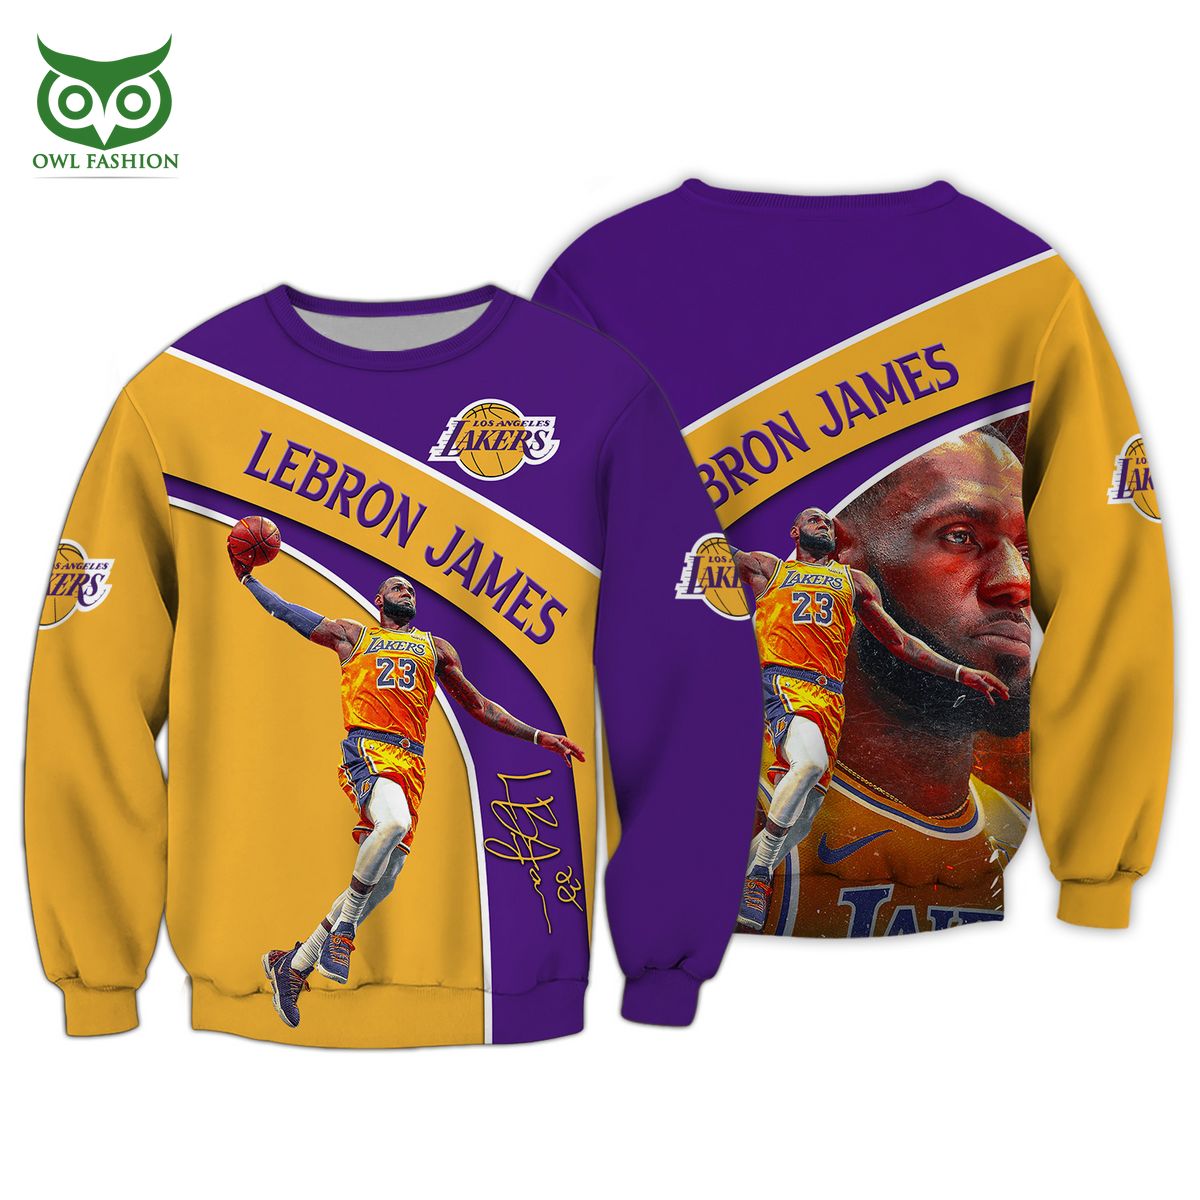 Los Angeles Lakers Collection  Jerseys, T-shirts, Shorts, Hoodies